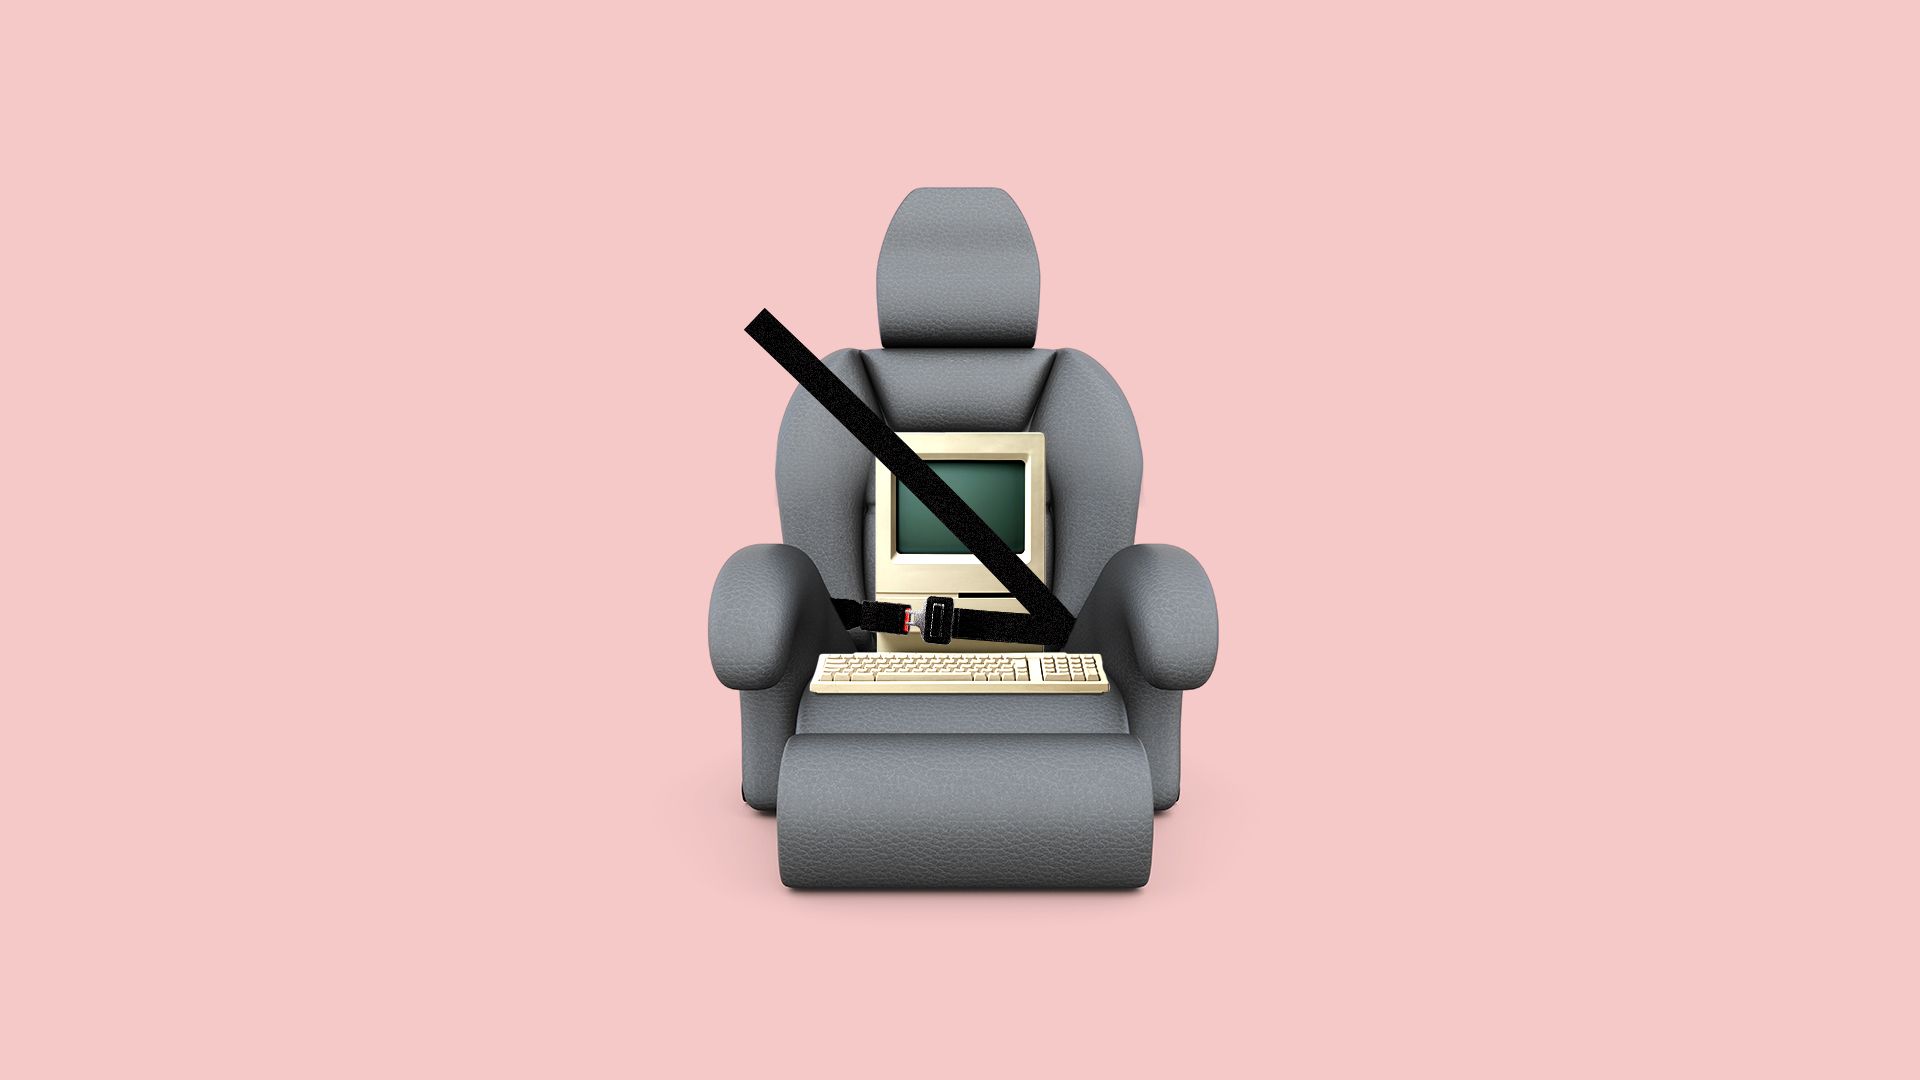 Illustration of a computer wearing a seat belt.